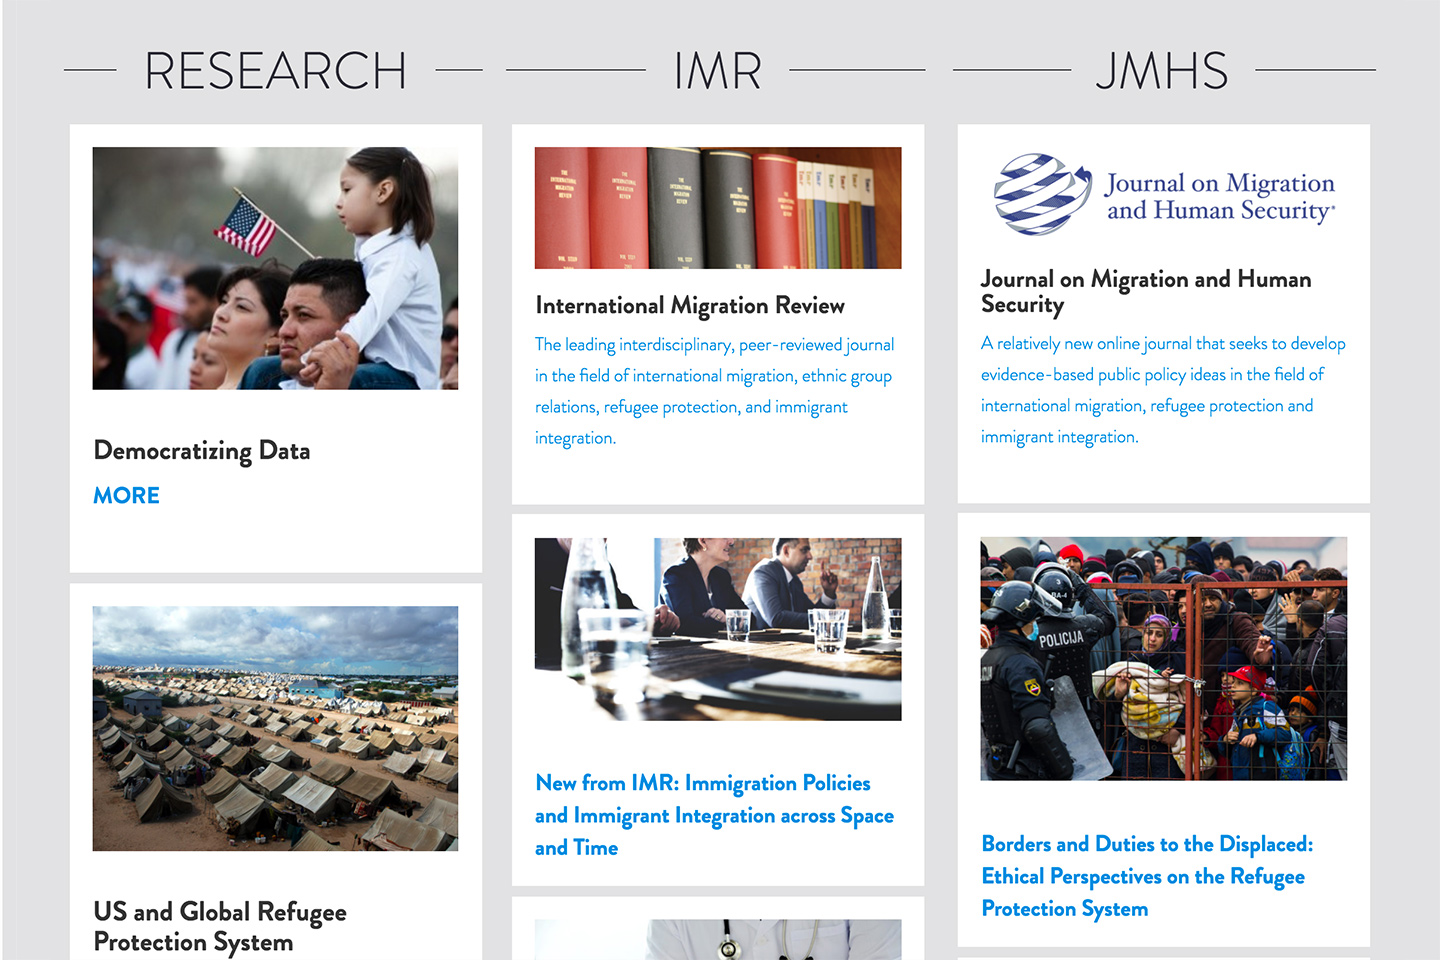 CMSNY: Center for Migration Studies: Center for Migration Studies - Featured Modules